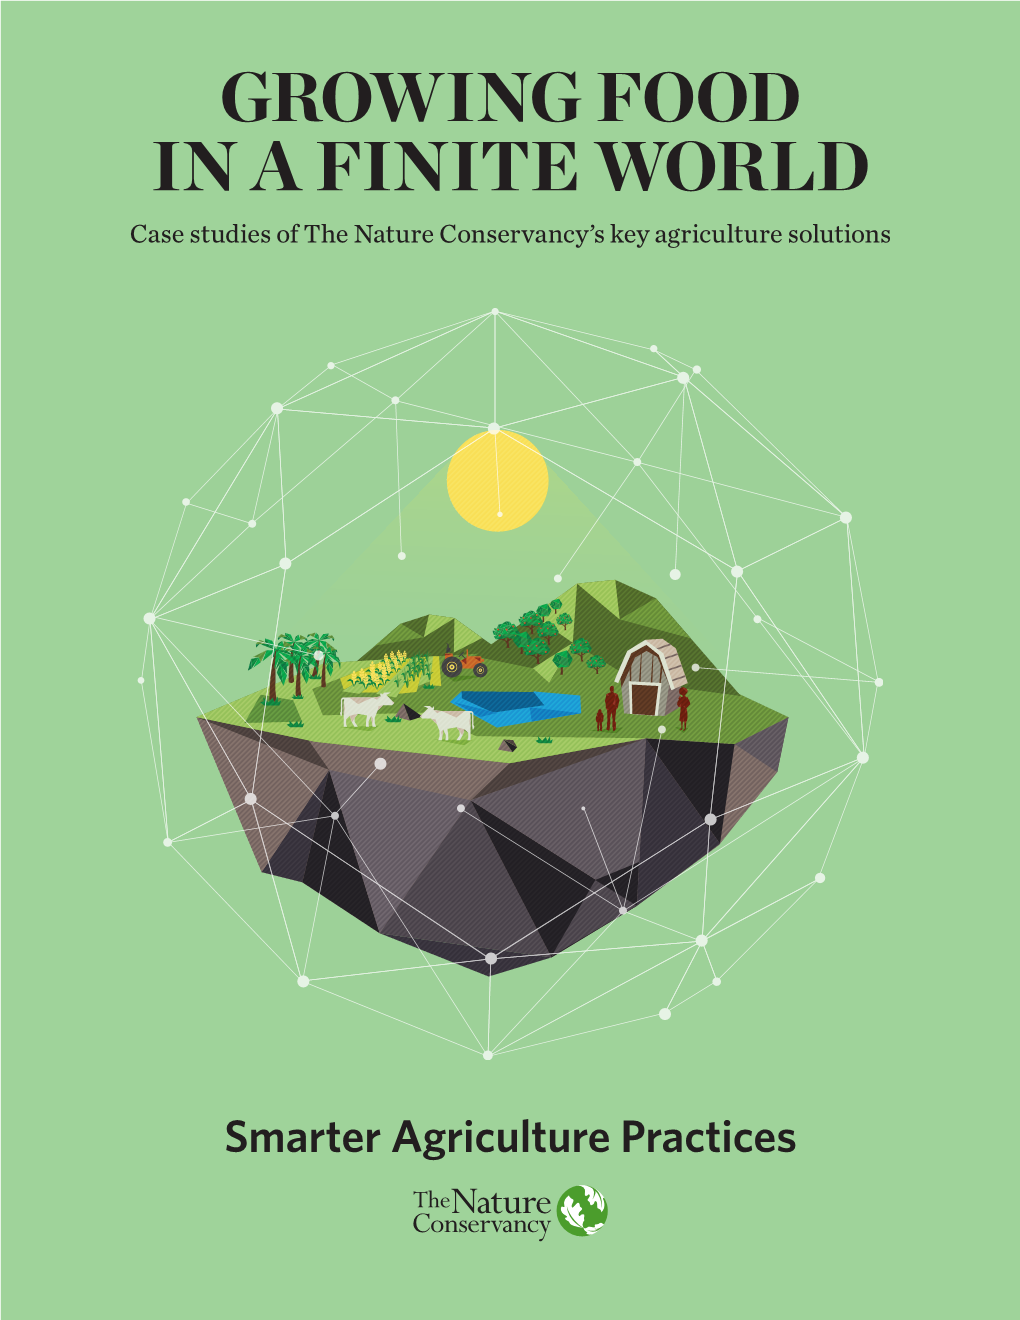 GROWING FOOD in a FINITE WORLD Case Studies of the Nature Conservancy’S Key Agriculture Solutions